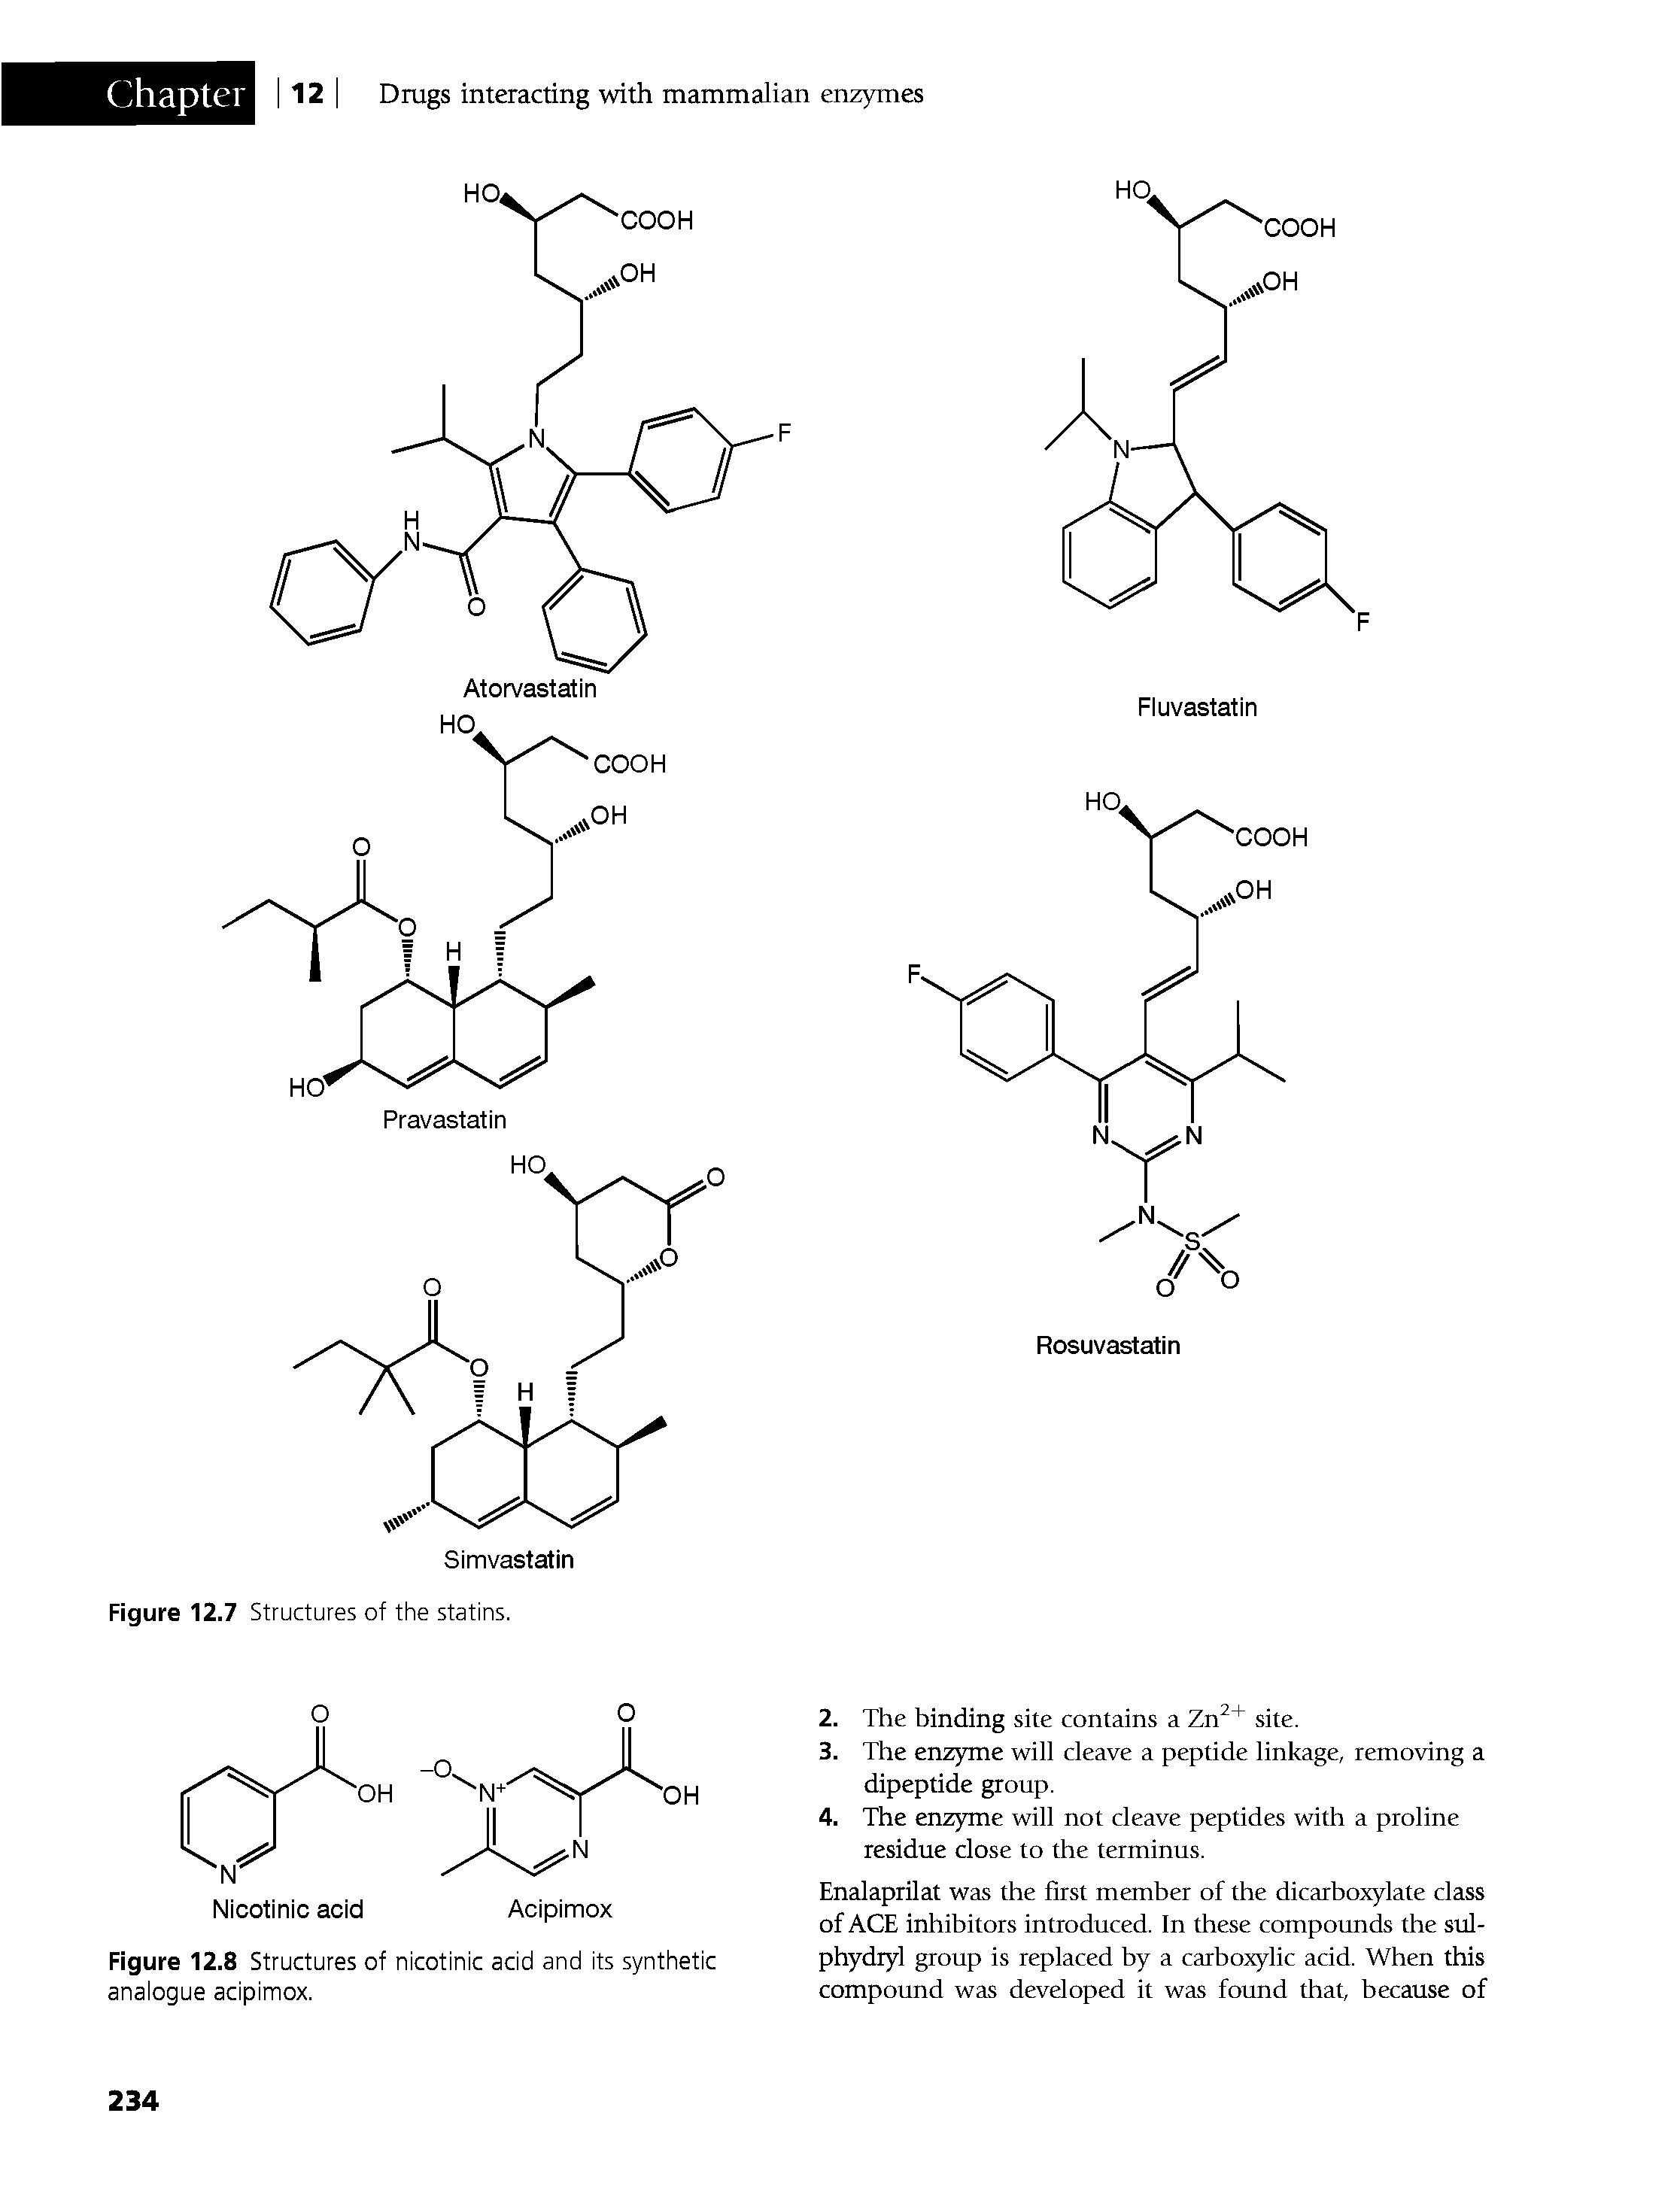 Figure 12.8 Structures of nicotinic acid and its synthetic analogue acipimox.